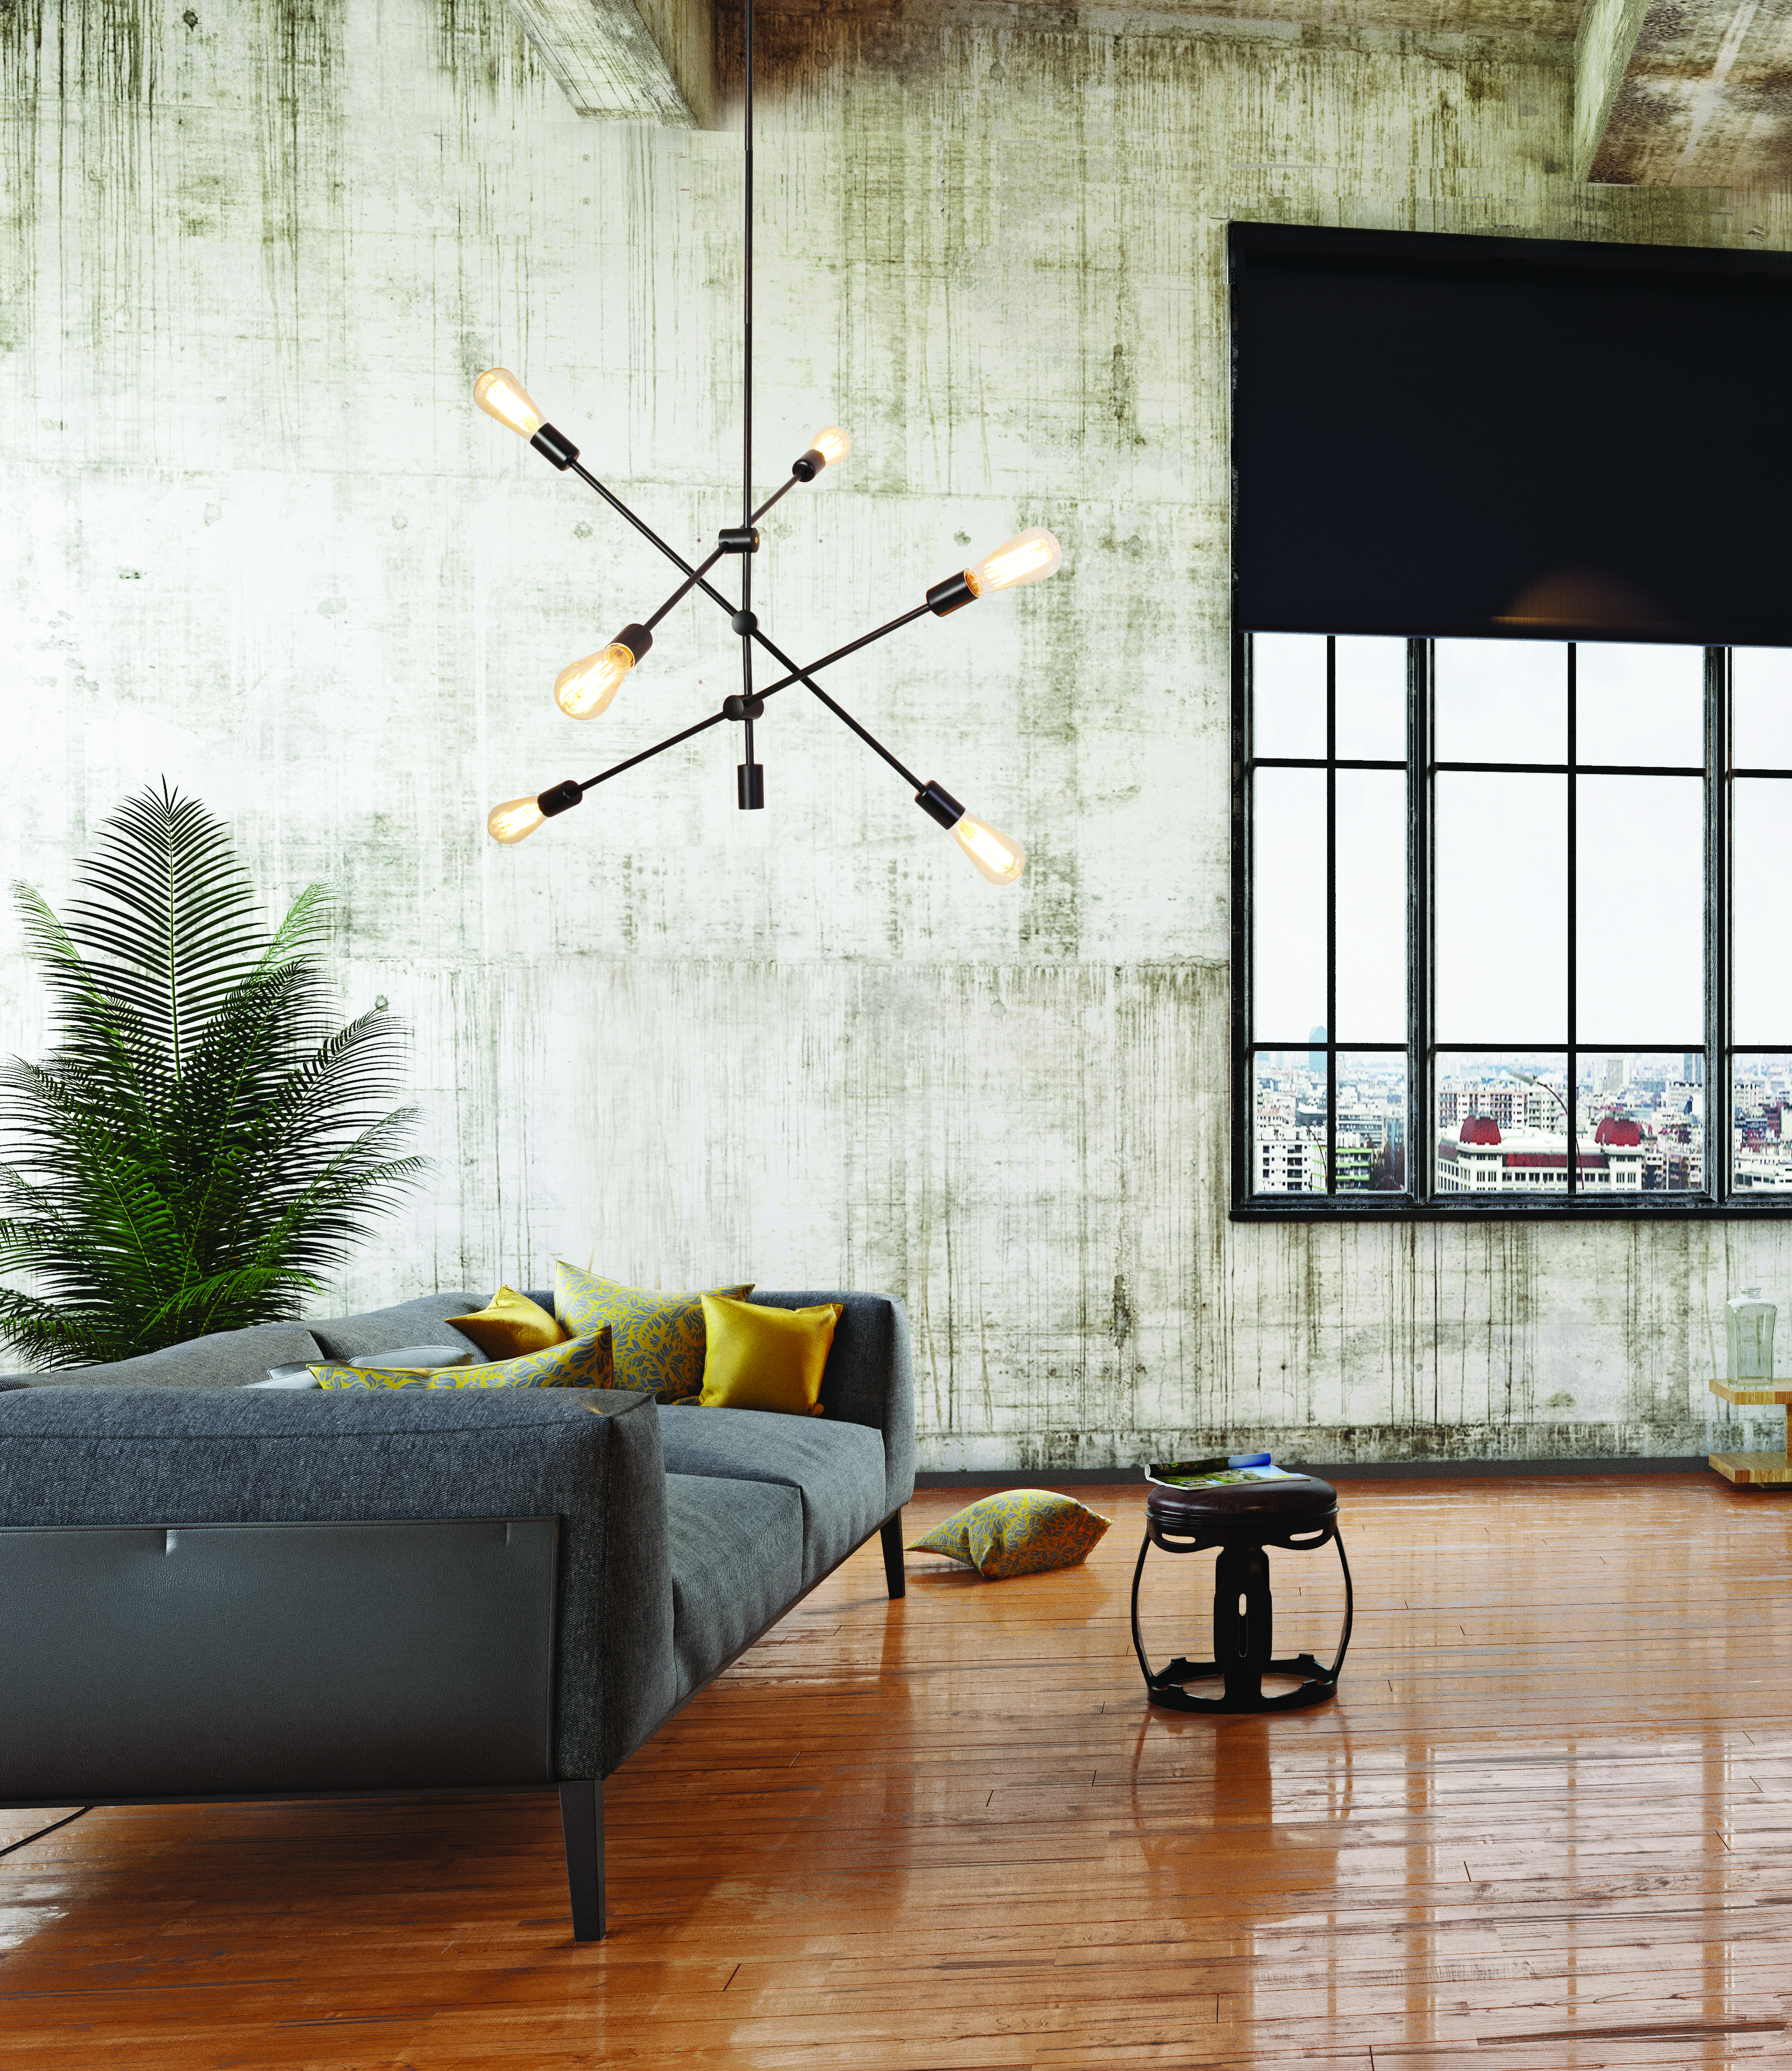 LED Modern pendant lighting iL 014-6001-BK above a drawing table in an artist's studio with floral canvass and concrete walls